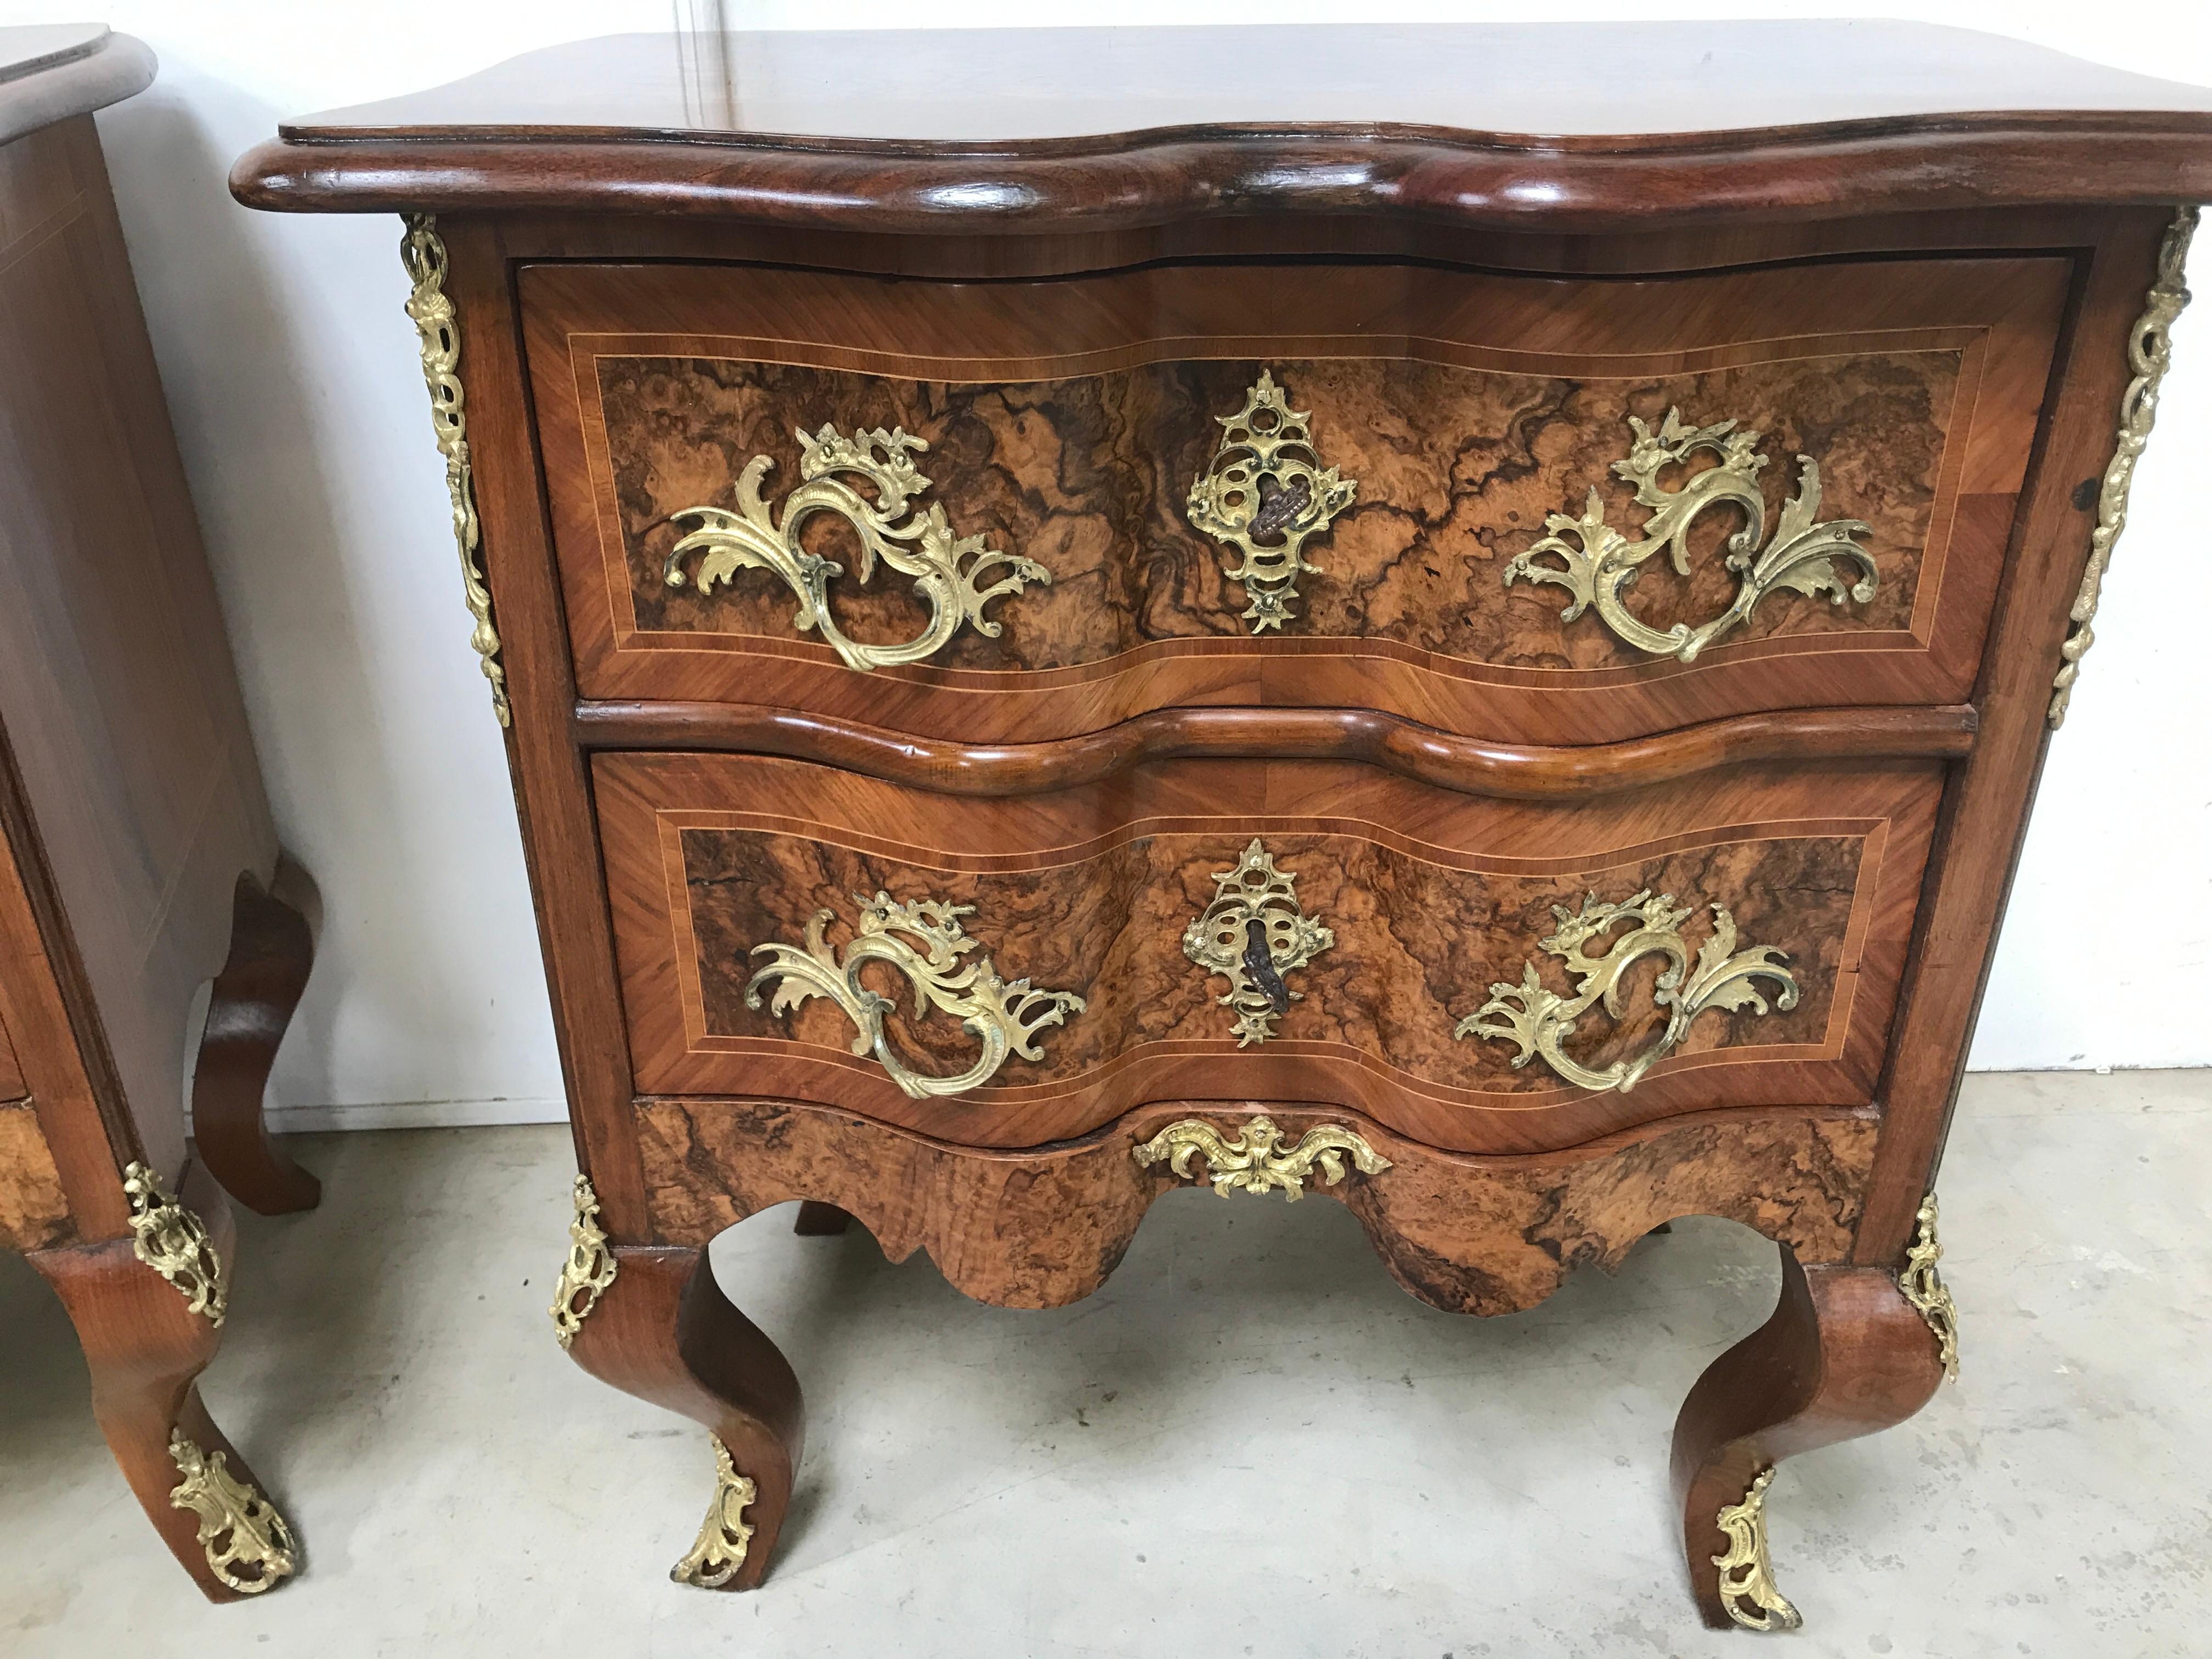 A fine pair of 19th century walnut baroque commodes. Of small size, lovely use of walnut timbers using burr walnut, kingwood and box wood. With all original ormolu mounts and keys. All cleaned and polished, and looking stunning.